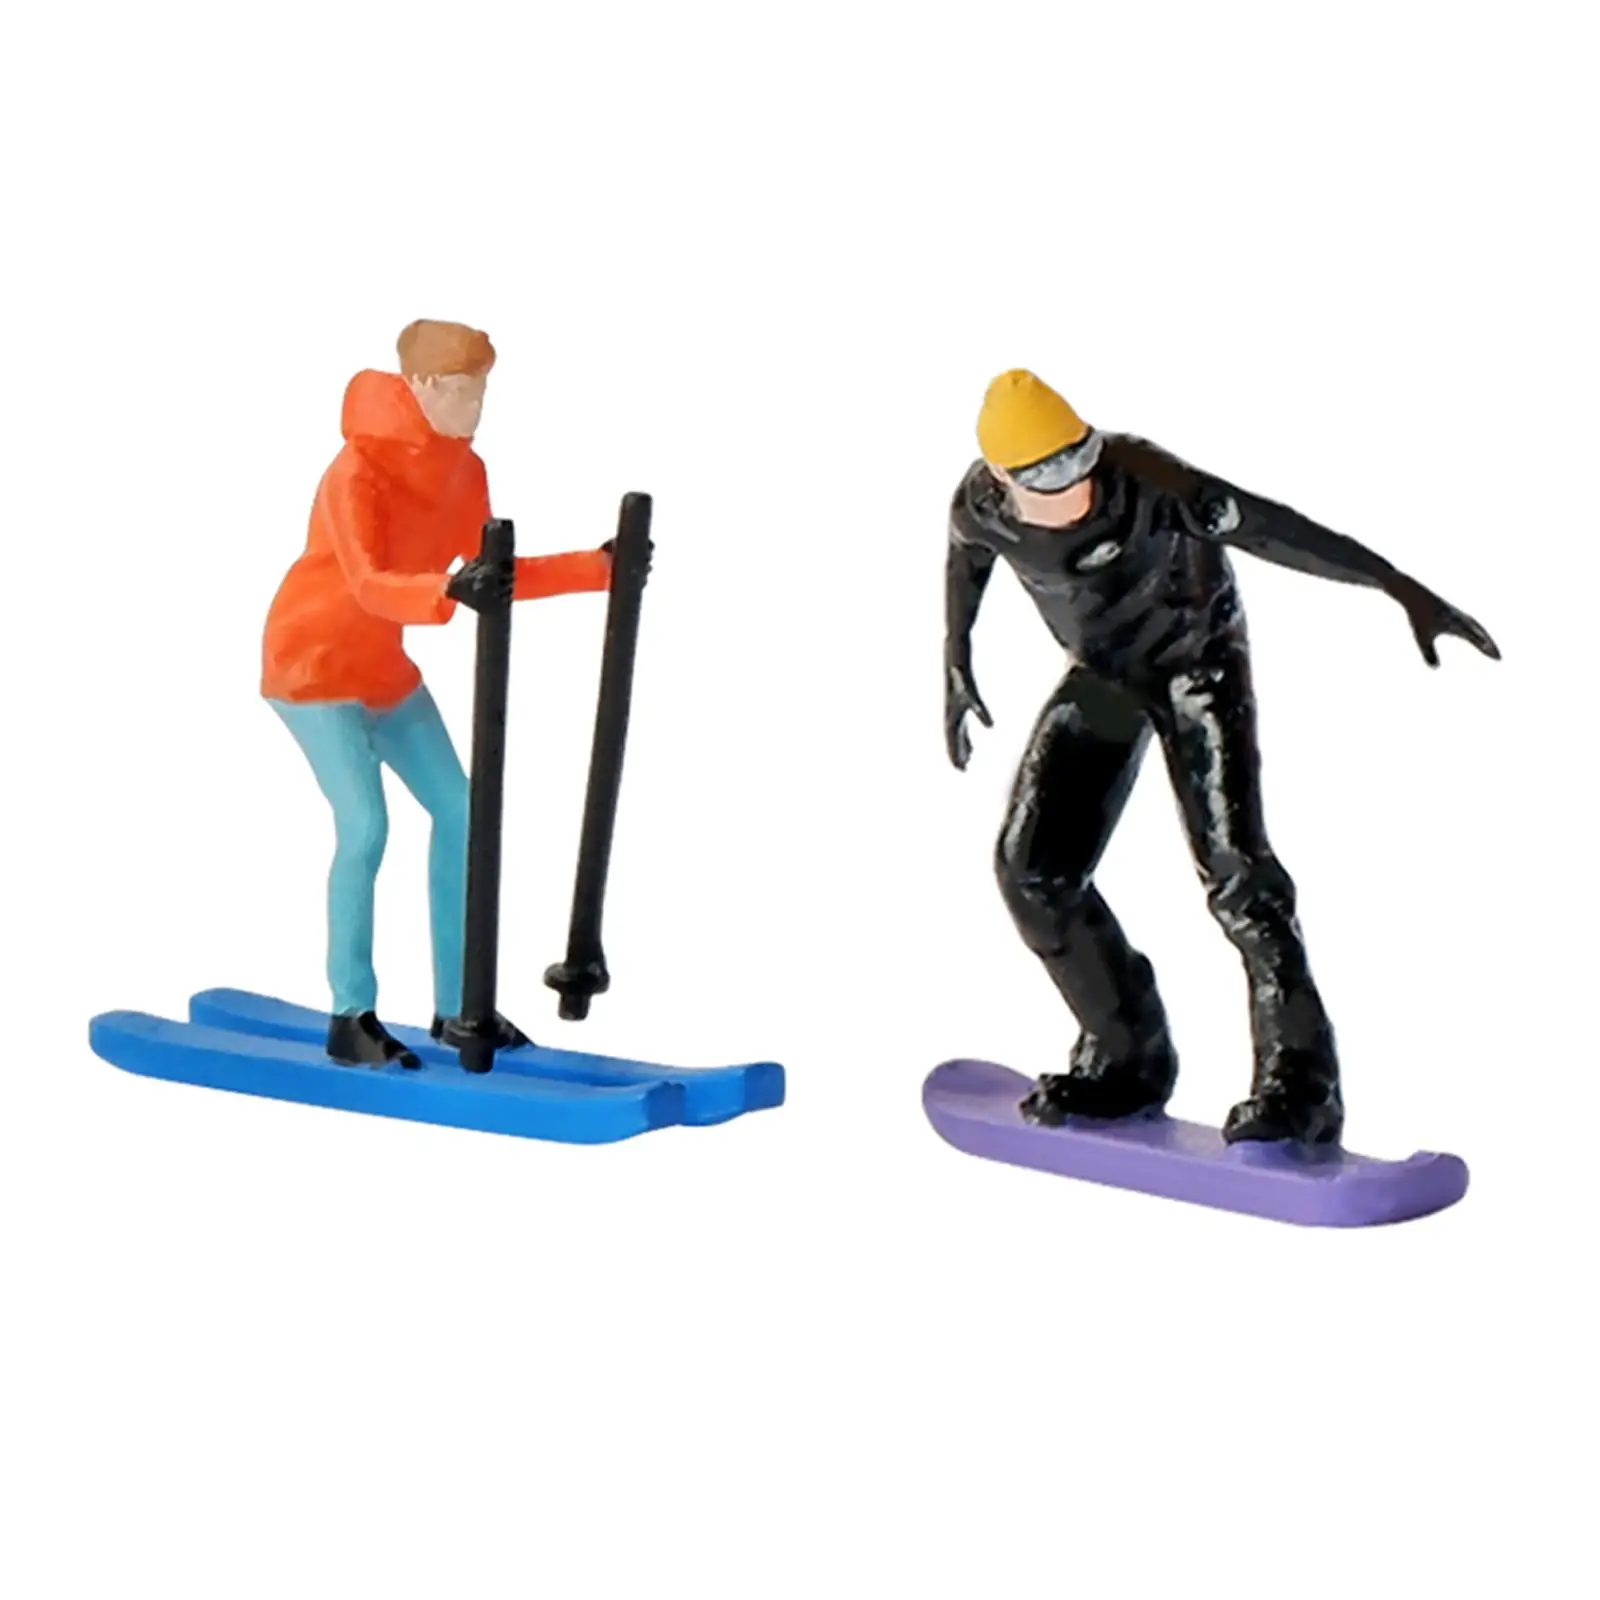 1/64 Scale Miniature Model Skiing Figures for Sand Table Diorama Layout